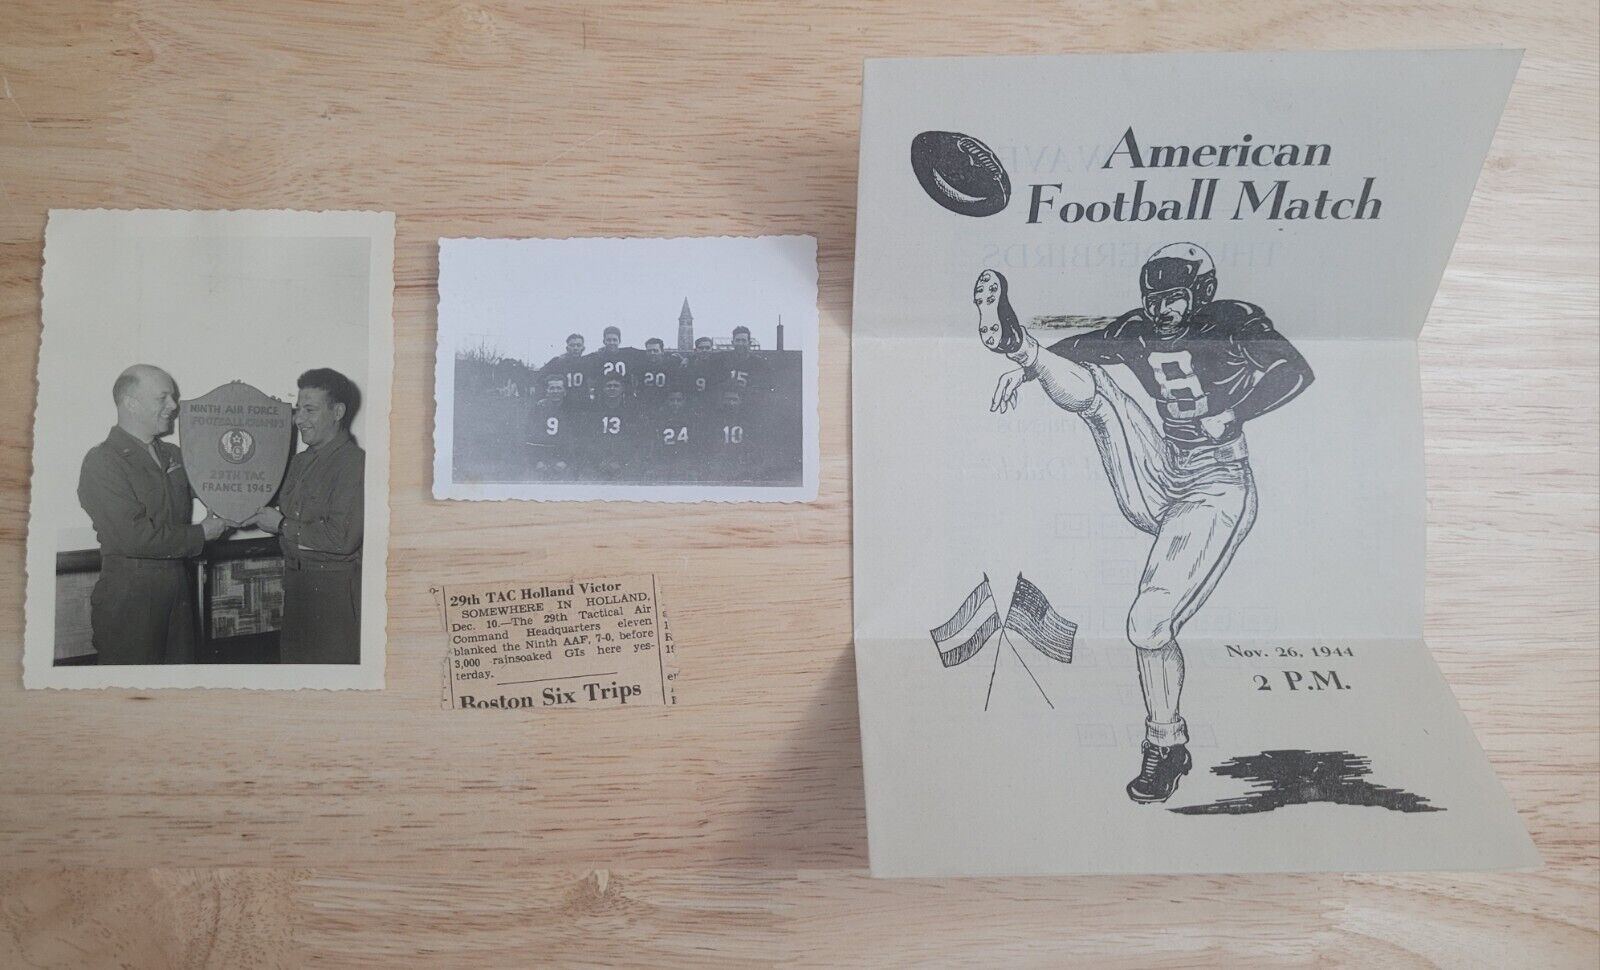 American Football Game in Europe during World War II, Program and Photos lot. 